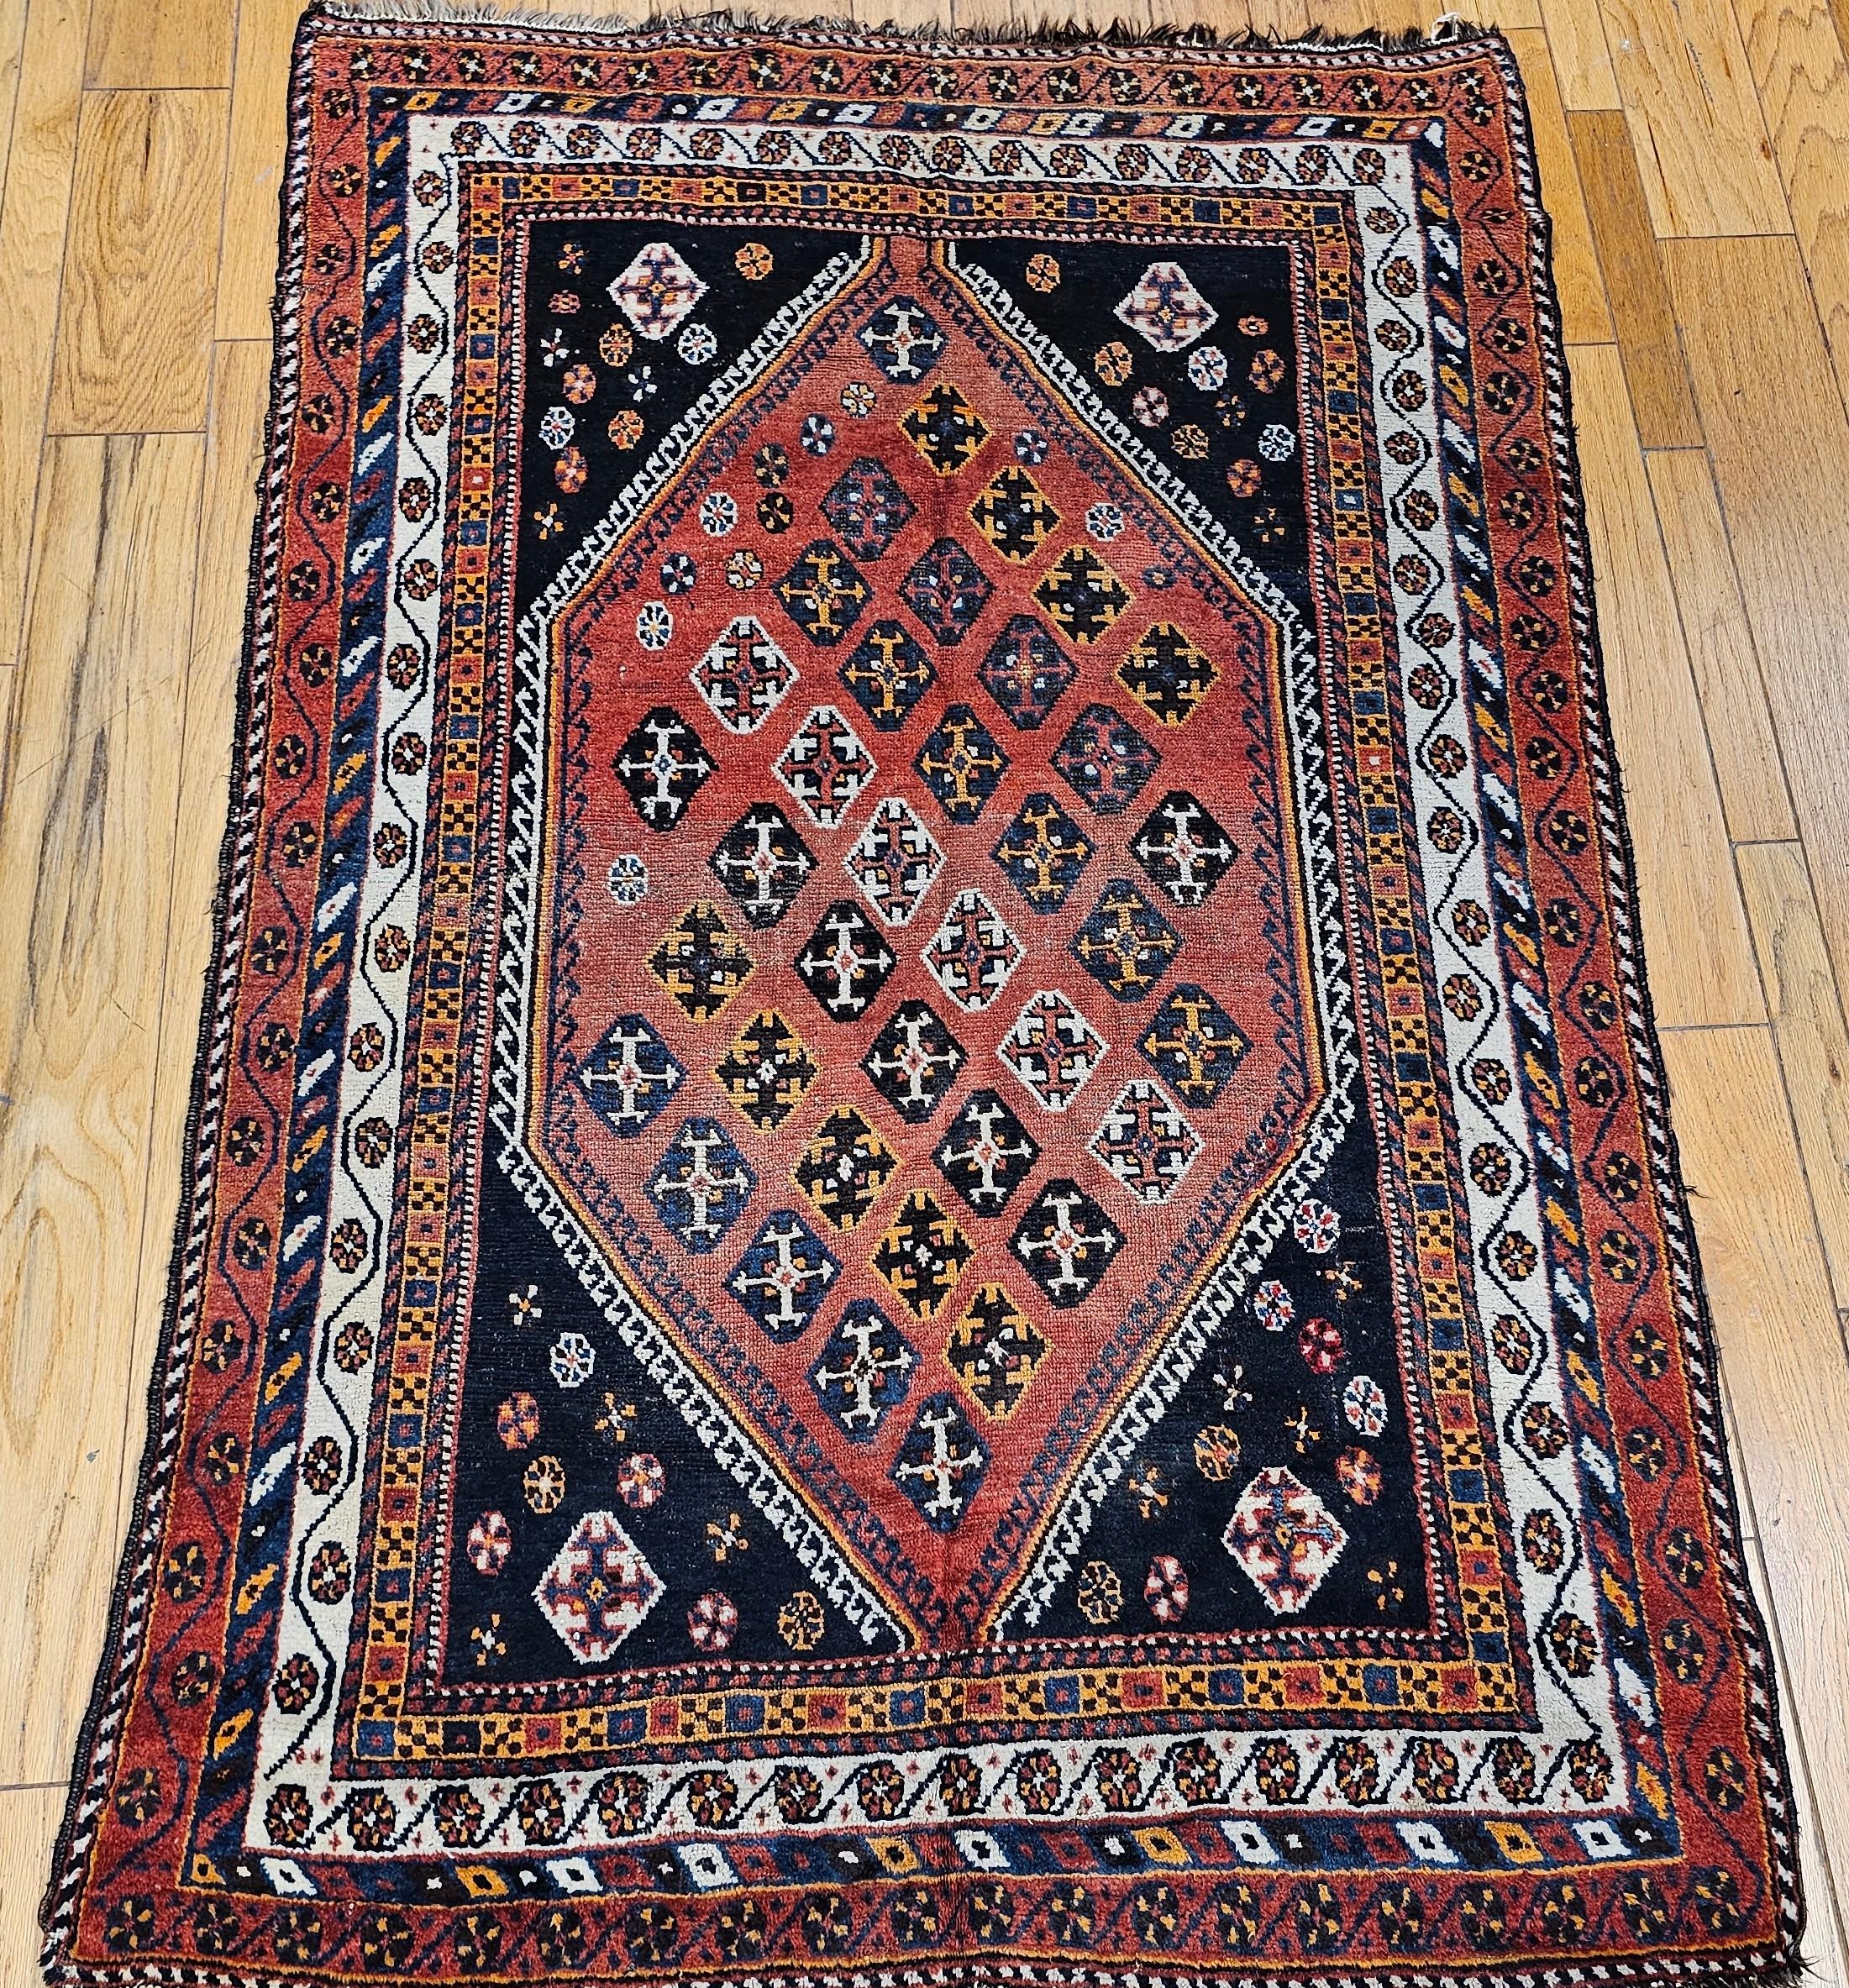 A wonderful Qashqai tribal carpet from the early 1900s from southwest Persia.  A large medallion almost covers the whole rug with small geometric designs in various colors set throughout the medallion.  It has dark blue spandrels with small